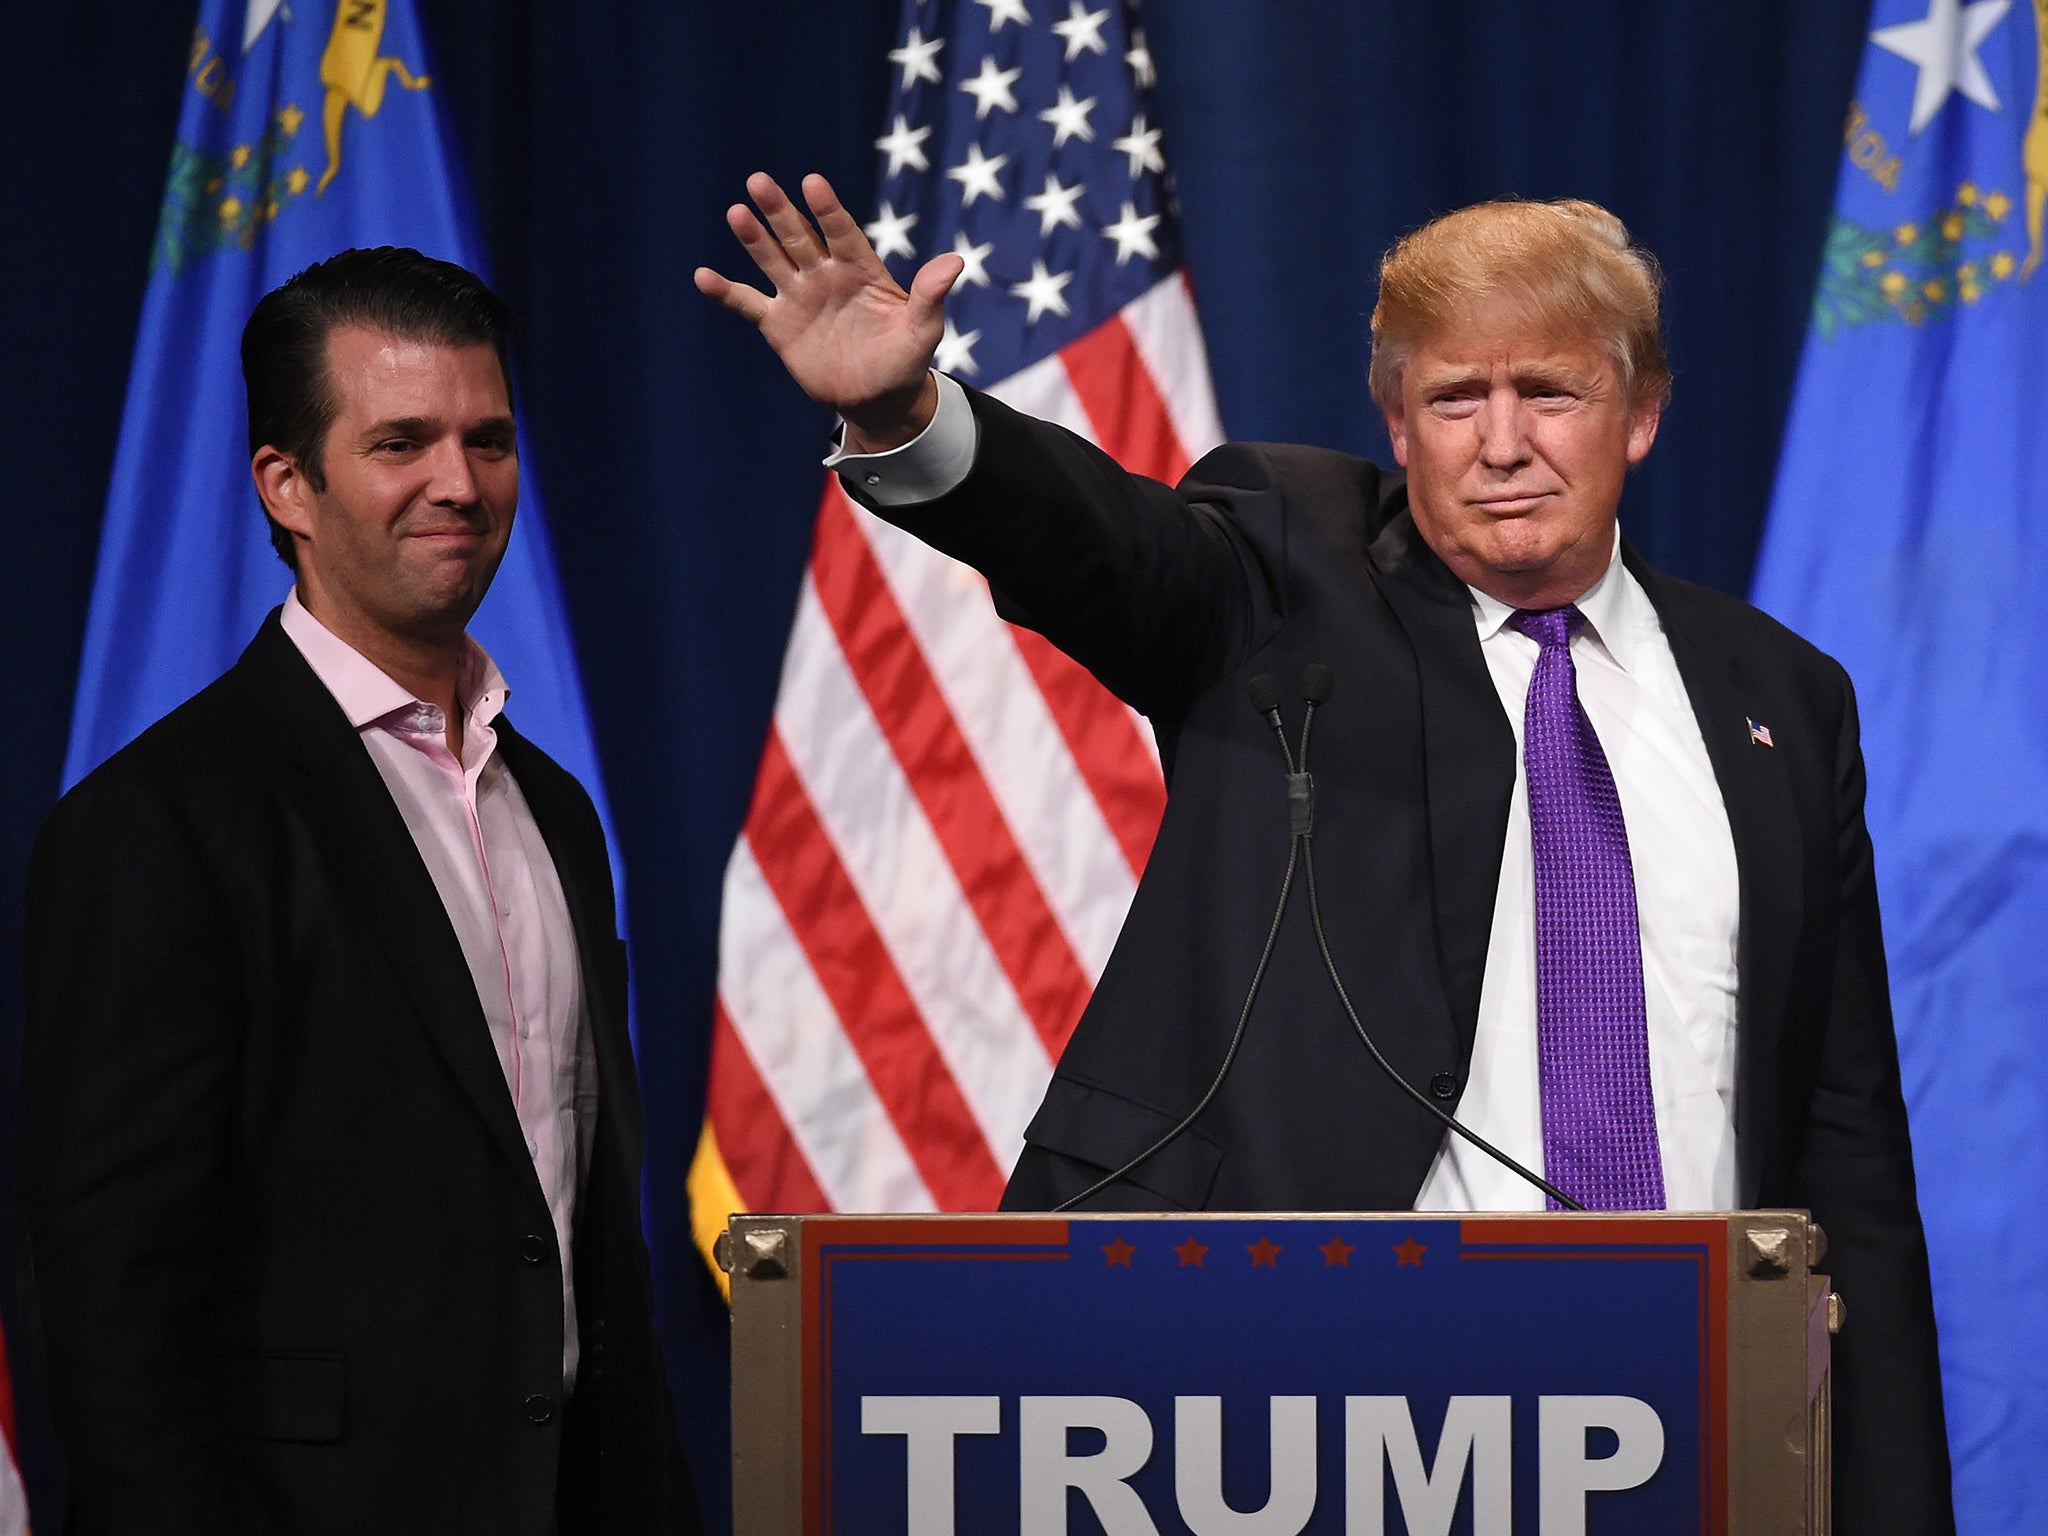 Republican presidential candidate Donald Trump's eldest son has been an active part of his campaign